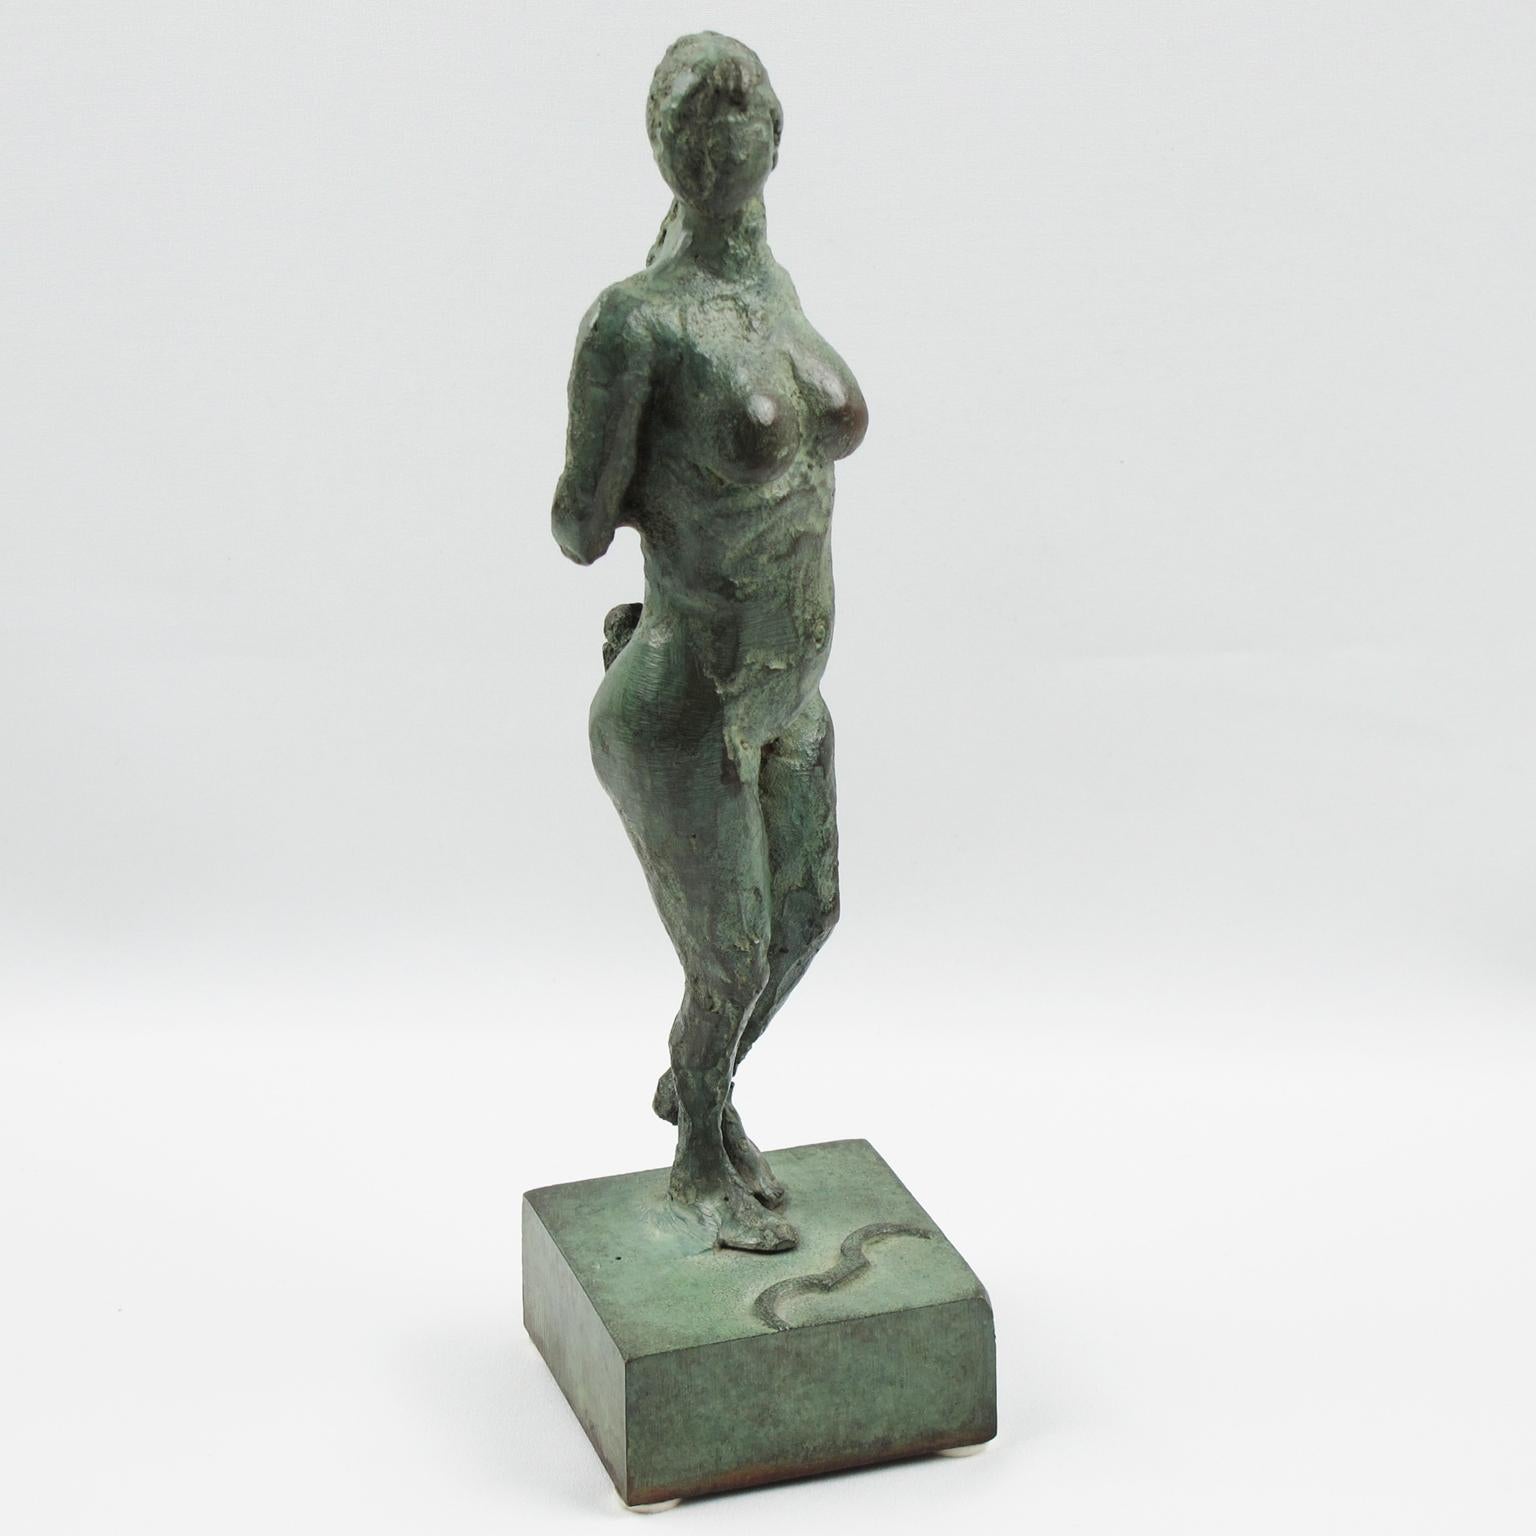 This is a stunning French Art Deco bronze sculpture figurine. The statue features a stylized freestyle interpretation of Artemis or Diana the Huntress (Diane Chasseresse). The nude female has a handmade feel textured pattern design with both arms